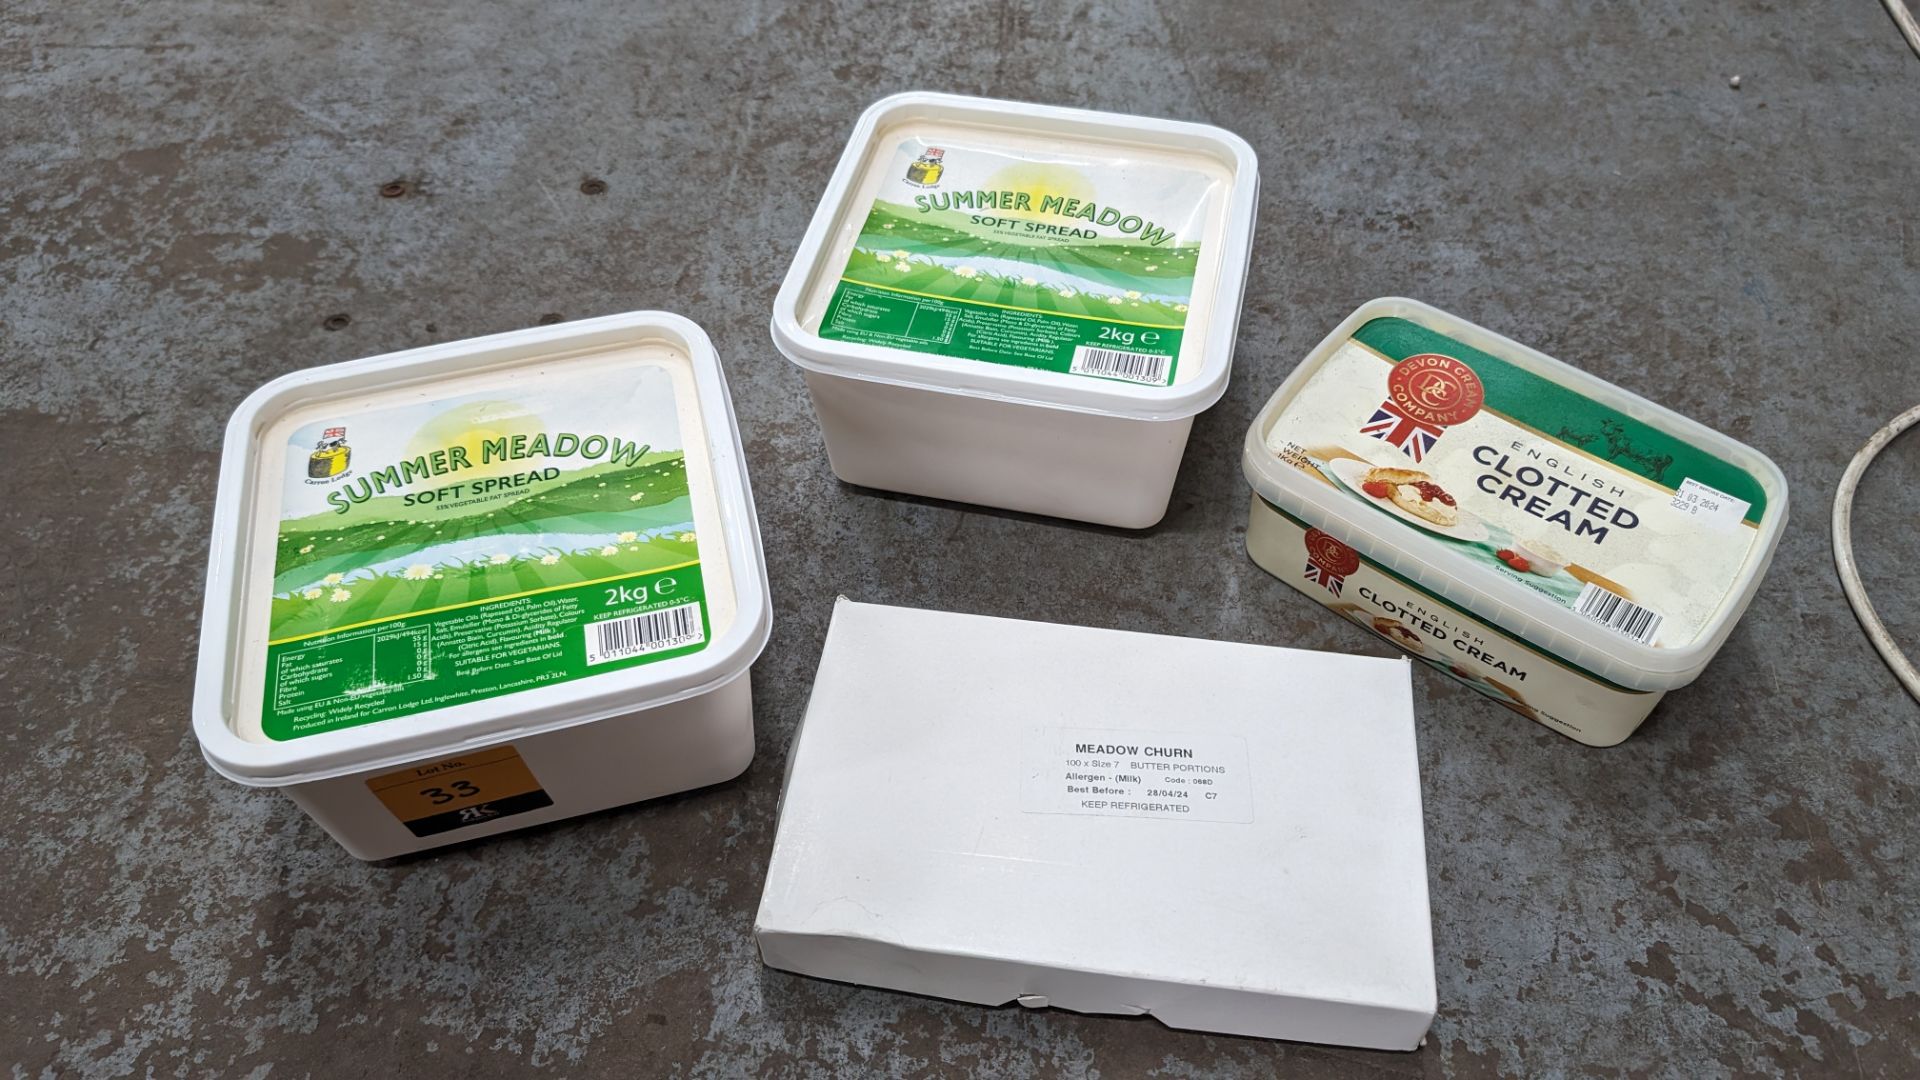 2 off 2kg tubs of Summer Meadow soft spread plus box of Meadow Churn individual packets of butter (1